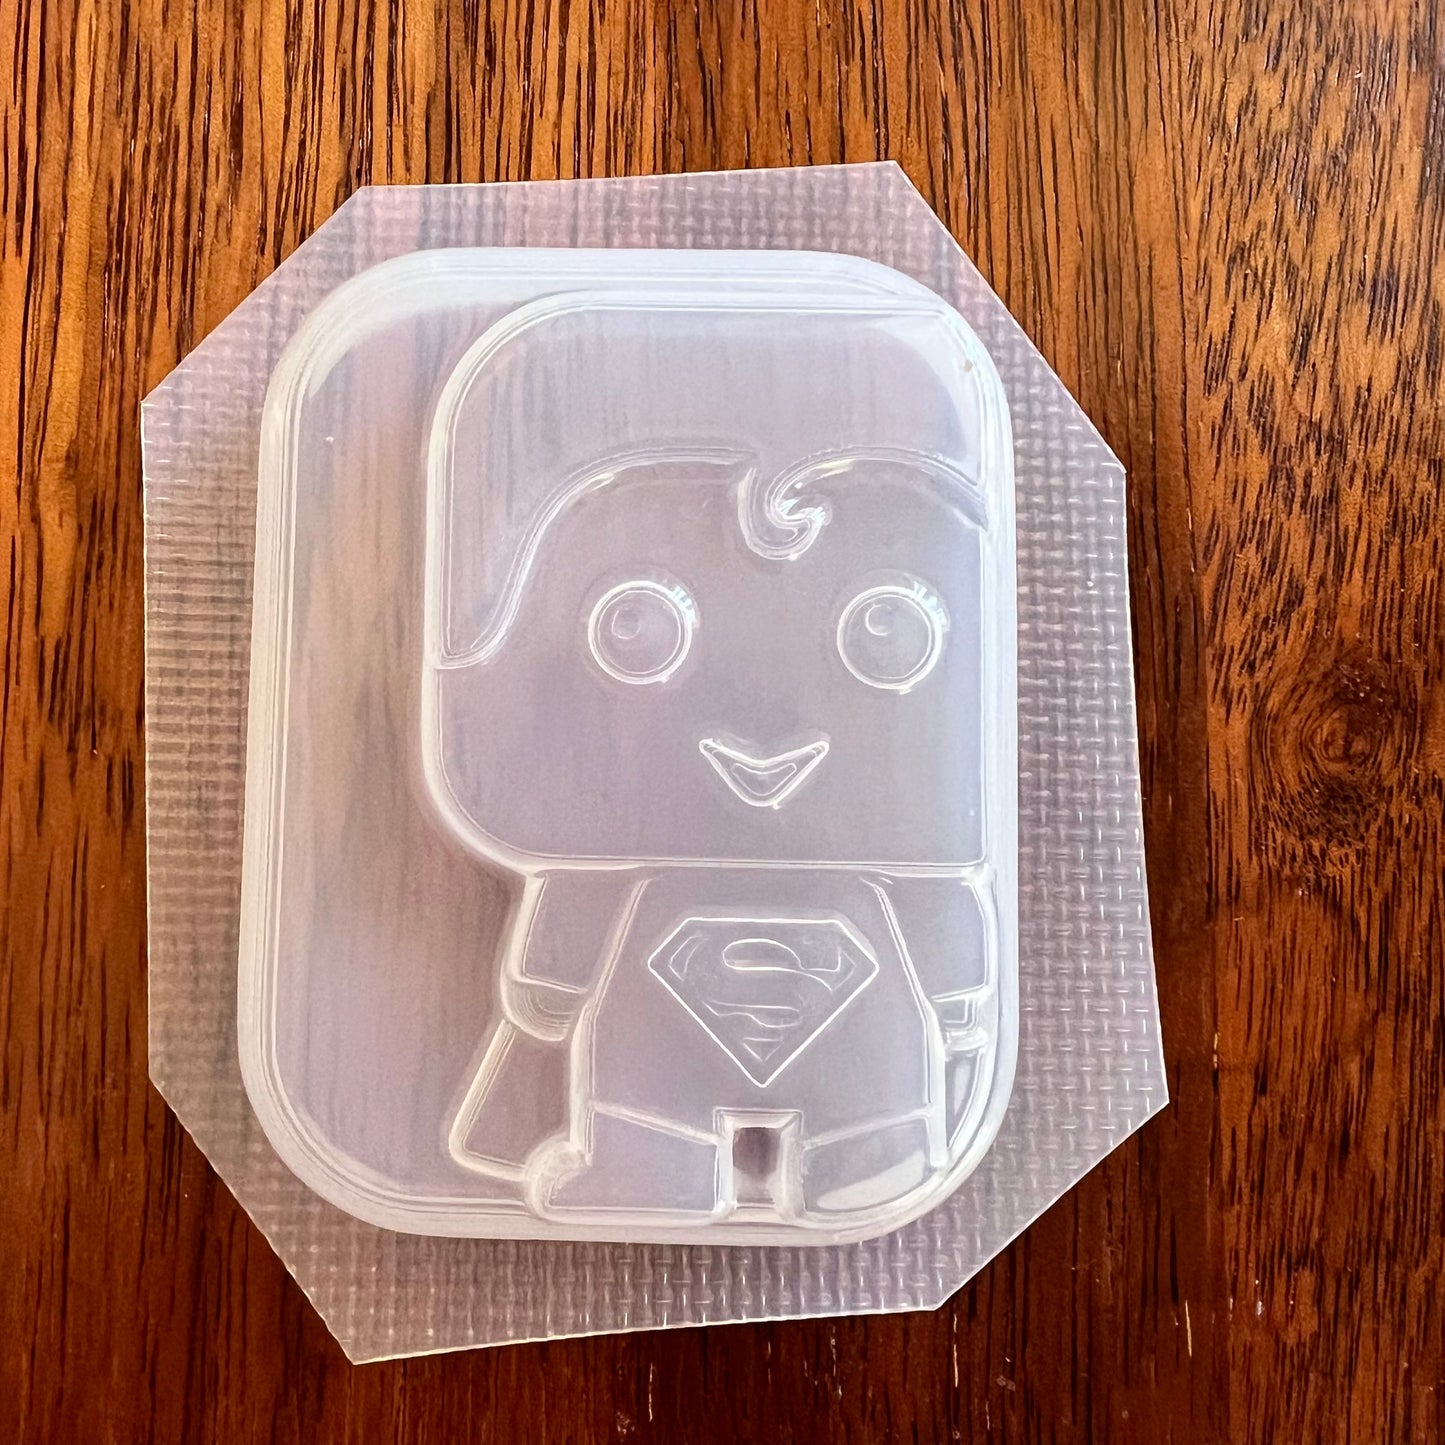 Action Heroes Cubes (Vacuum Form Mould)